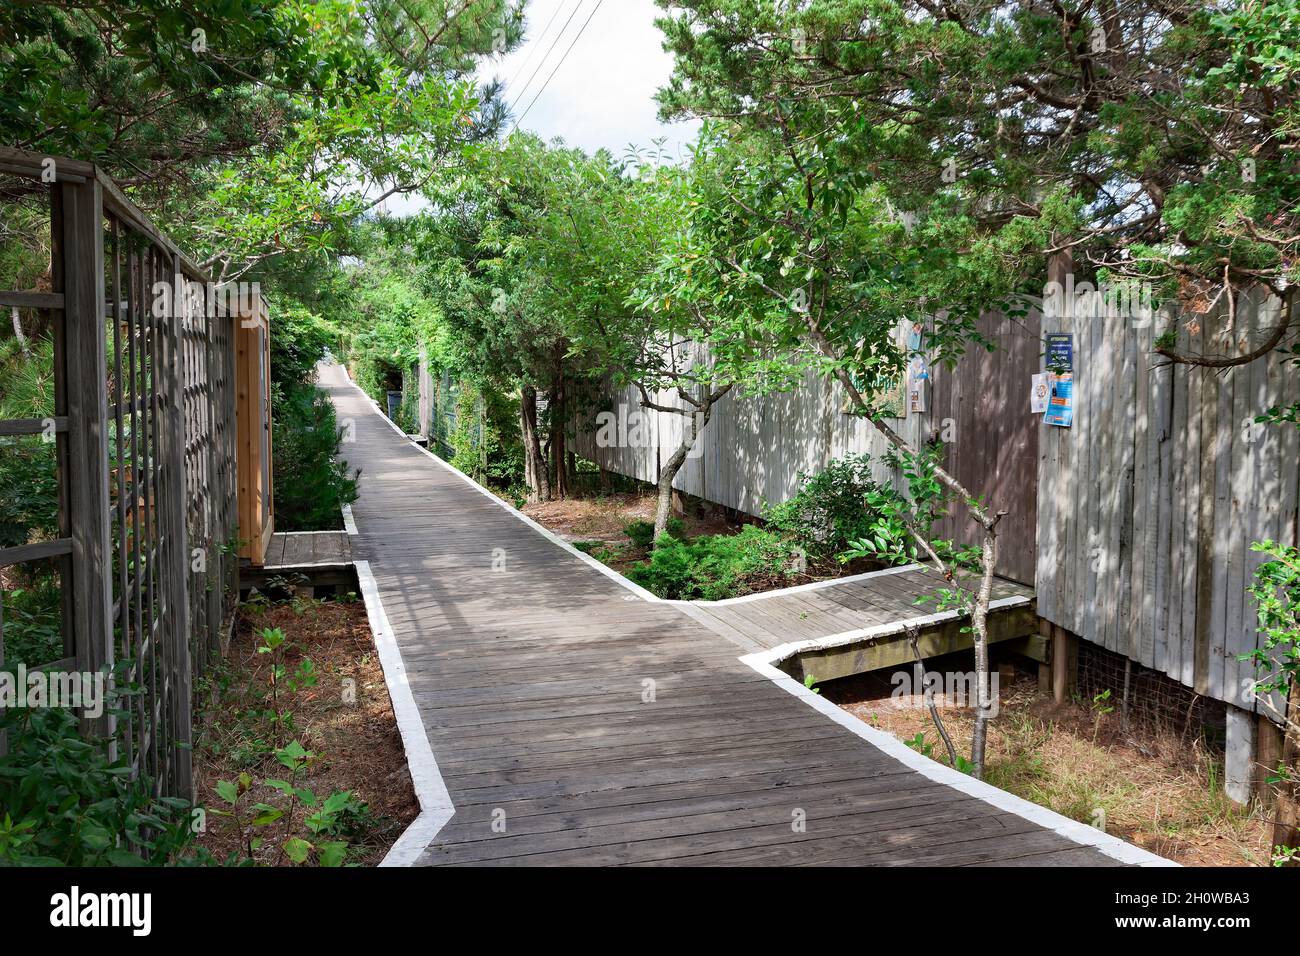 The boardwalk in Cherry Grove, Fire Island, New York that connects all homes, stores, and beach in the popular LGBTQ community. Stock Photo